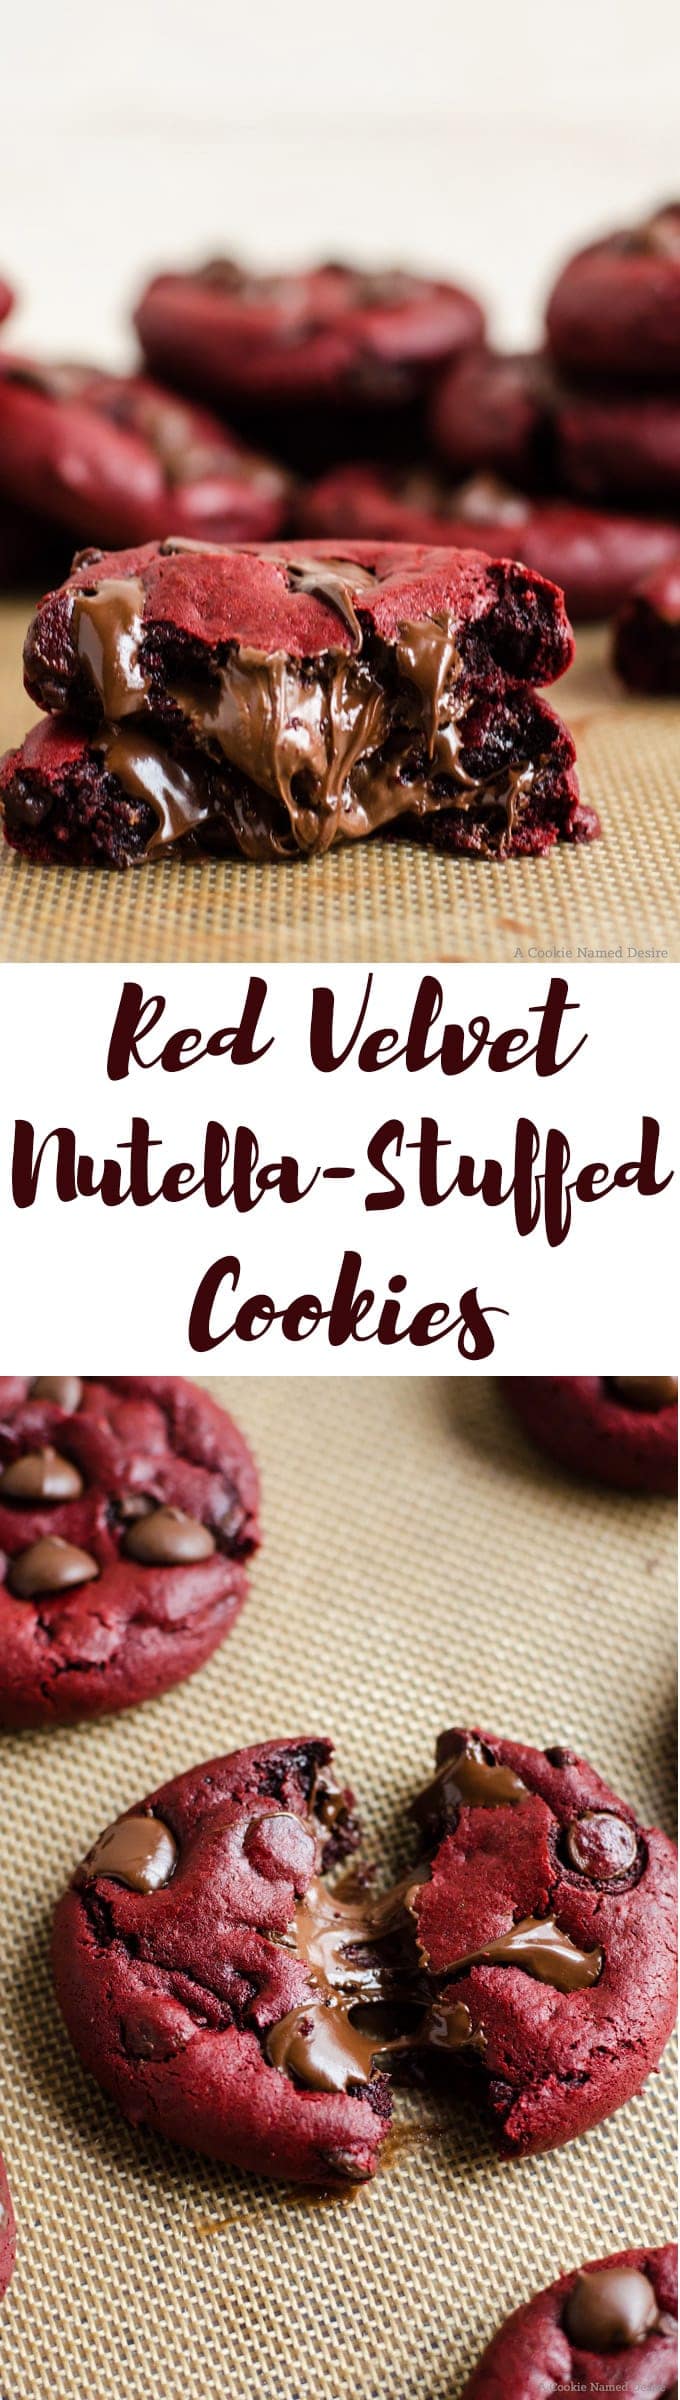 Nutella-stuffed red velvet cookies. These cookies are everything and the only recipe you need for dessert! 